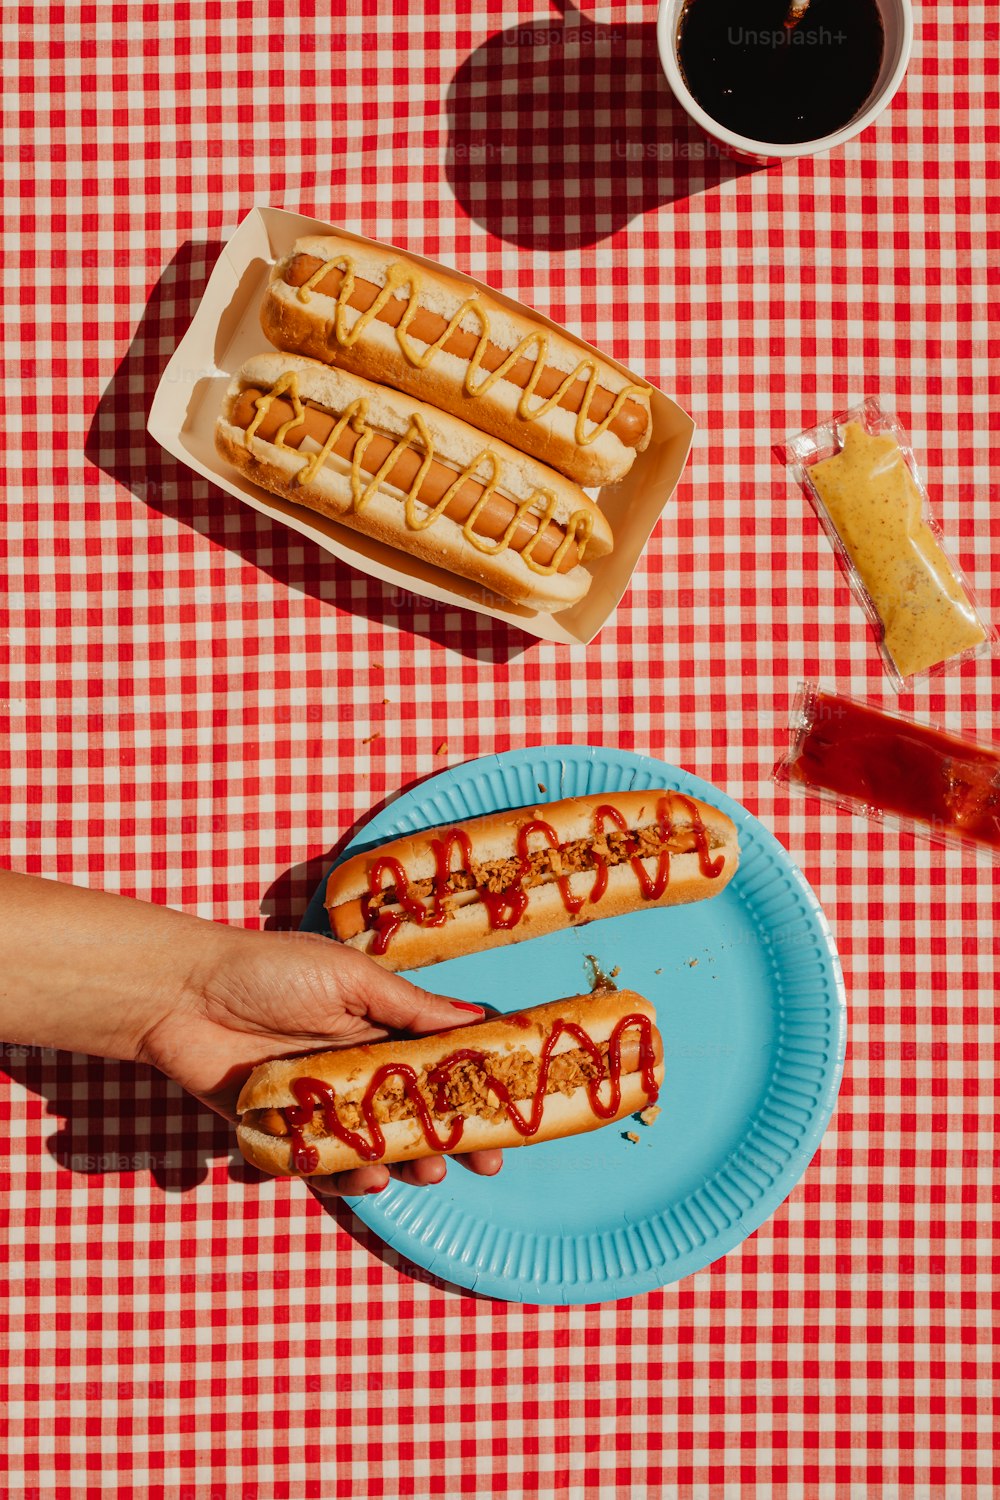 a person holding a hot dog on a plate